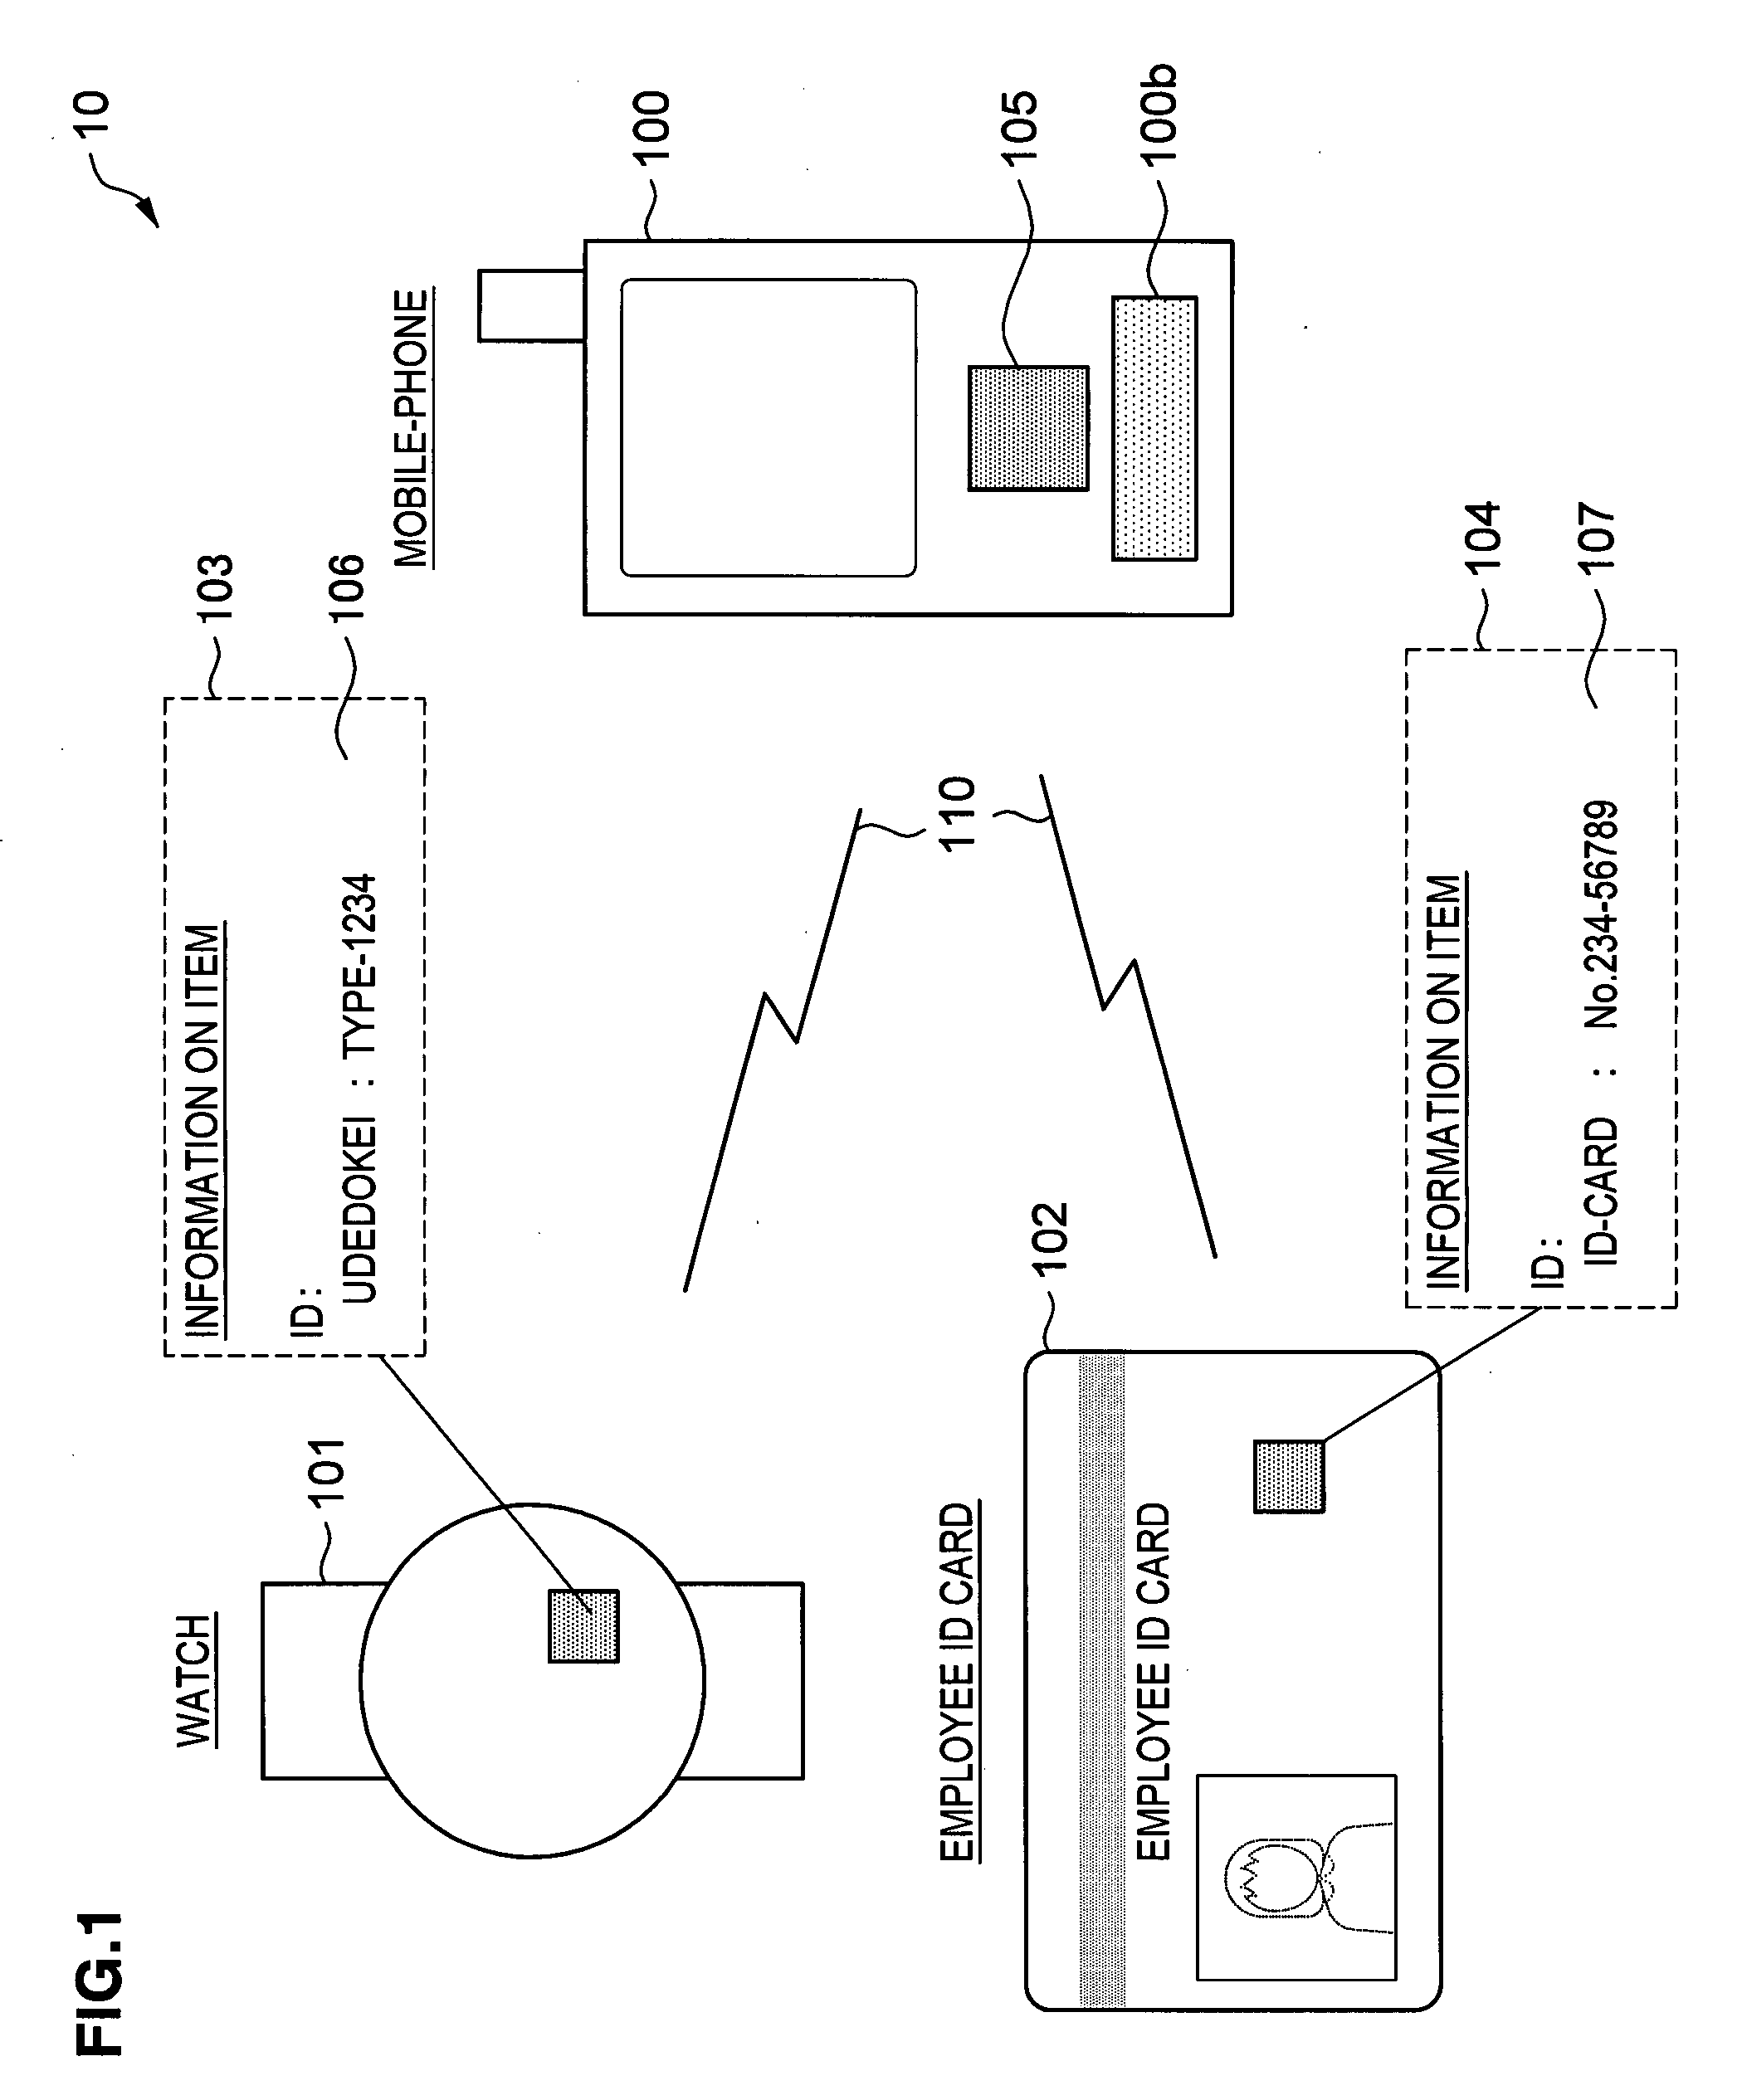 Portable electronic device, security system and method for determining allowable operating range of portable electronic device